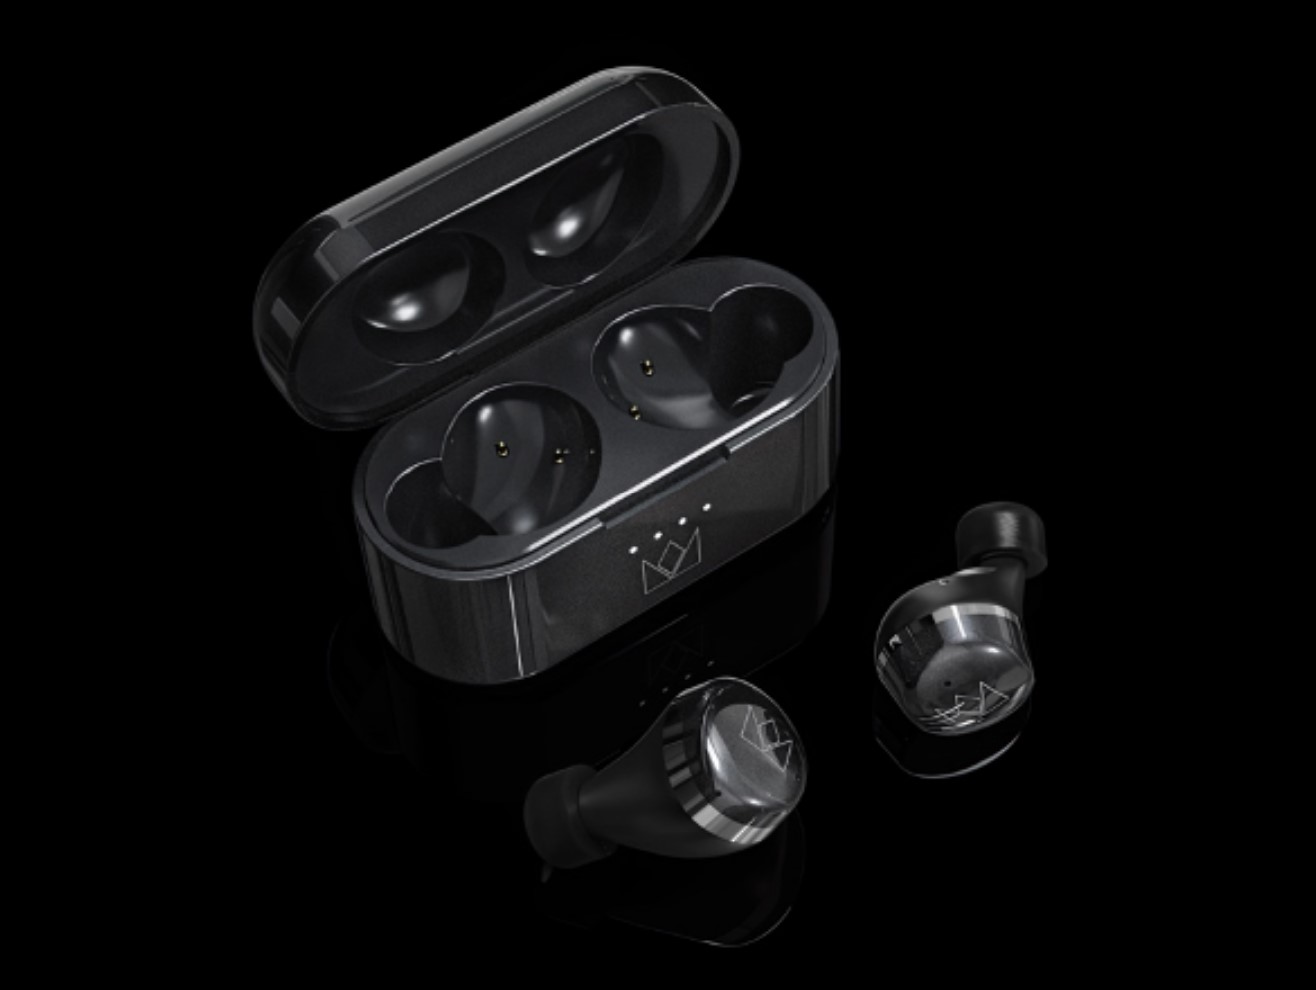 Noble Audio launches Falcon Max earbuds using xMEMS drivers for